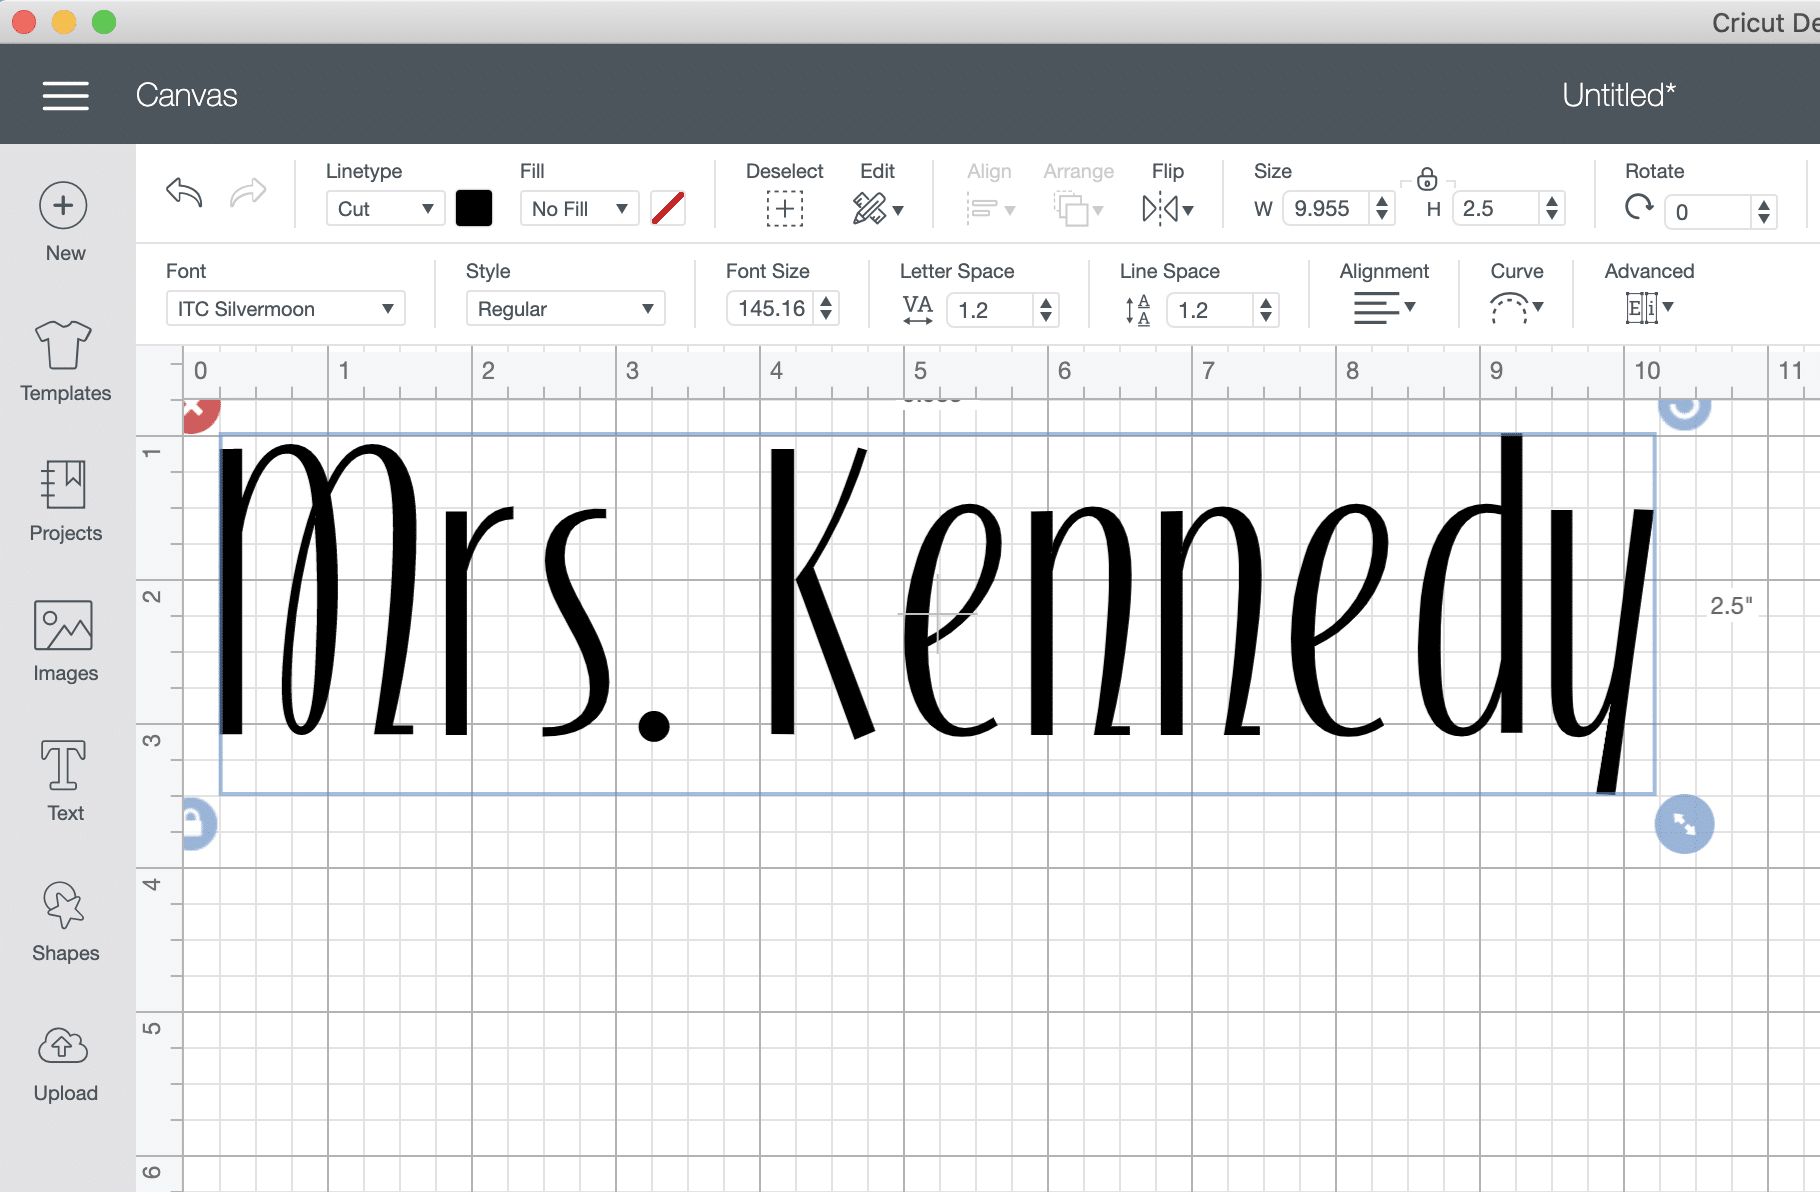 Screenshot of Cricut Design Space with Mrs. Kennedy